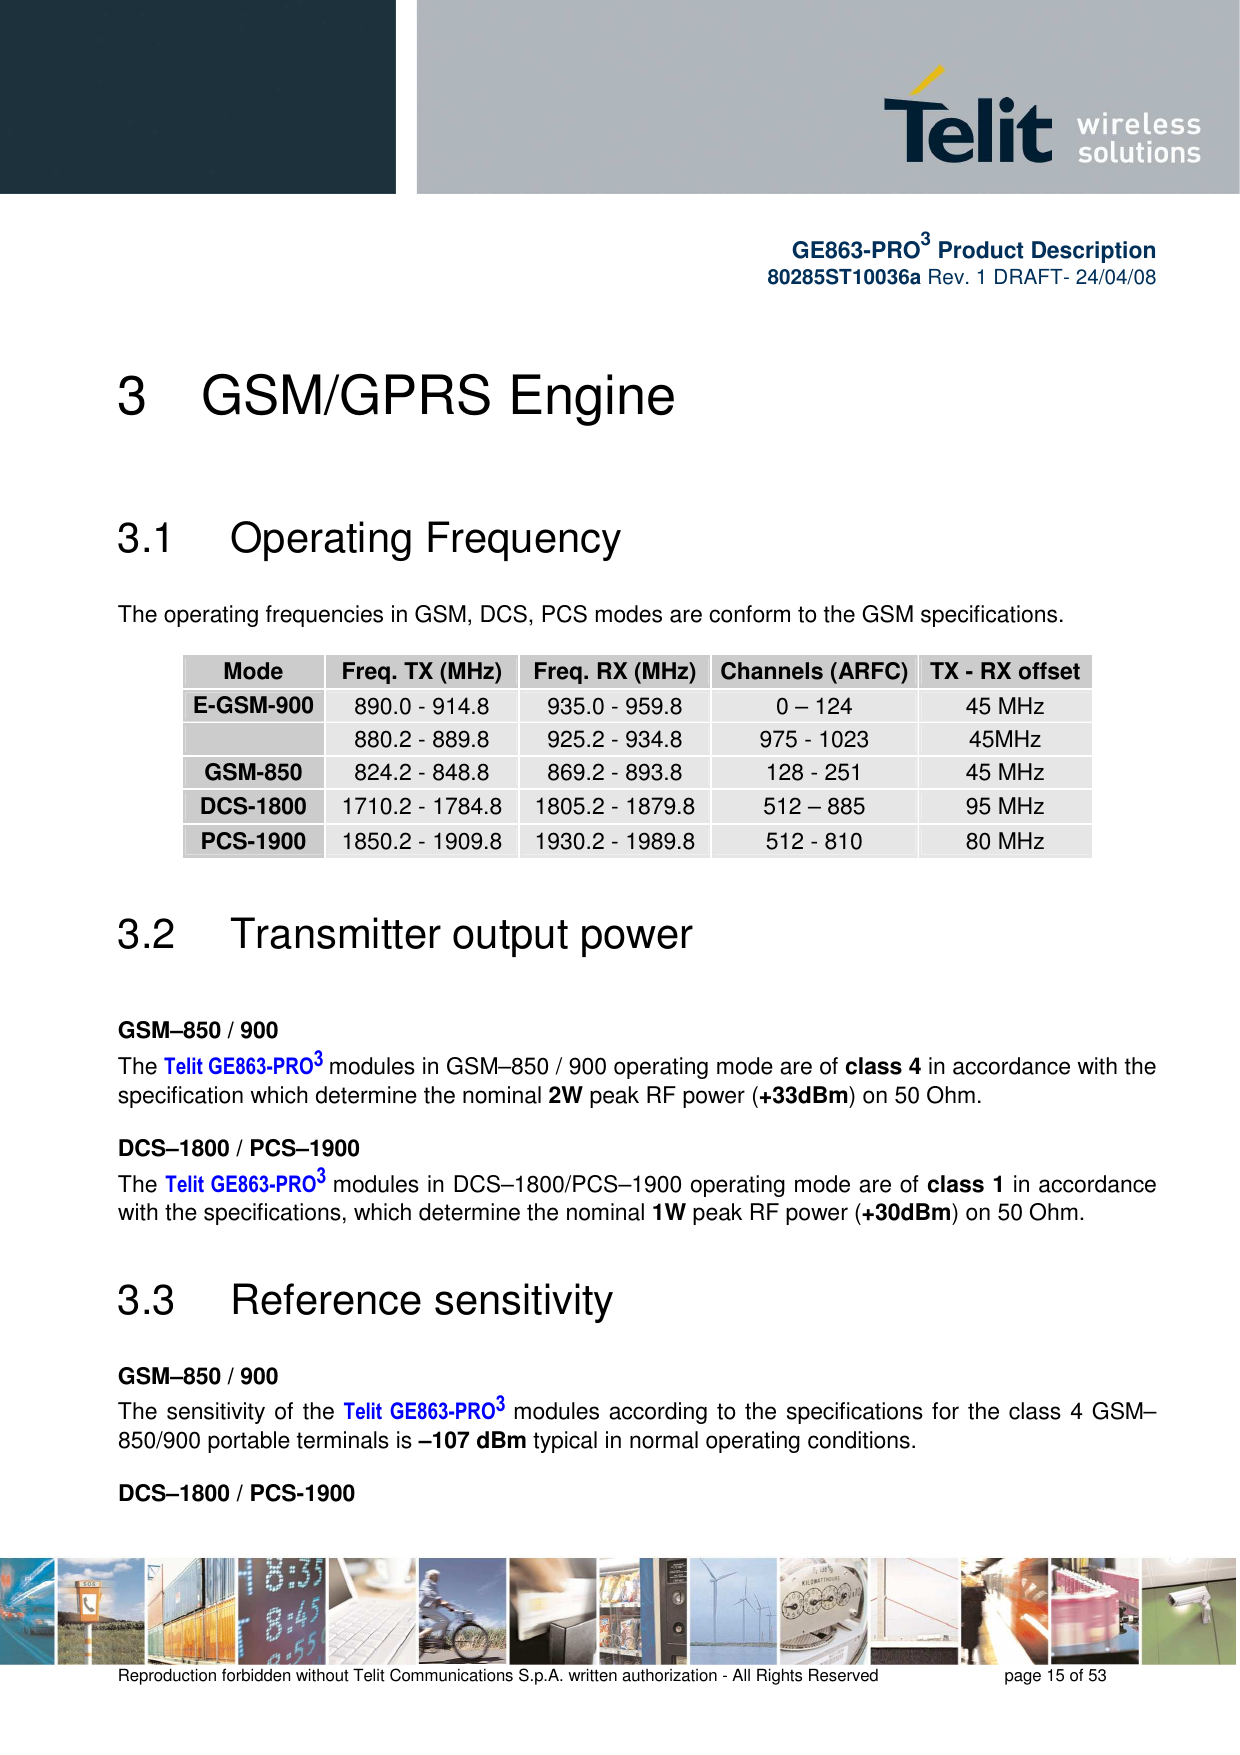       GE863-PRO3 Product Description 80285ST10036a Rev. 1 DRAFT- 24/04/08    Reproduction forbidden without Telit Communications S.p.A. written authorization - All Rights Reserved    page 15 of 53  3  GSM/GPRS Engine 3.1   Operating Frequency  The operating frequencies in GSM, DCS, PCS modes are conform to the GSM specifications.   Mode  Freq. TX (MHz)  Freq. RX (MHz)  Channels (ARFC) TX - RX offset E-GSM-900 890.0 - 914.8  935.0 - 959.8  0 – 124  45 MHz  880.2 - 889.8  925.2 - 934.8  975 - 1023  45MHz GSM-850  824.2 - 848.8  869.2 - 893.8  128 - 251  45 MHz DCS-1800  1710.2 - 1784.8  1805.2 - 1879.8  512 – 885  95 MHz PCS-1900  1850.2 - 1909.8  1930.2 - 1989.8  512 - 810  80 MHz 3.2   Transmitter output power  GSM–850 / 900 The Telit GE863-PRO3 modules in GSM–850 / 900 operating mode are of class 4 in accordance with the specification which determine the nominal 2W peak RF power (+33dBm) on 50 Ohm.  DCS–1800 / PCS–1900 The Telit GE863-PRO3 modules in DCS–1800/PCS–1900 operating mode are of class 1 in accordance with the specifications, which determine the nominal 1W peak RF power (+30dBm) on 50 Ohm. 3.3   Reference sensitivity  GSM–850 / 900 The sensitivity of the Telit  GE863-PRO3 modules according to the specifications for the class 4 GSM–850/900 portable terminals is –107 dBm typical in normal operating conditions.  DCS–1800 / PCS-1900 